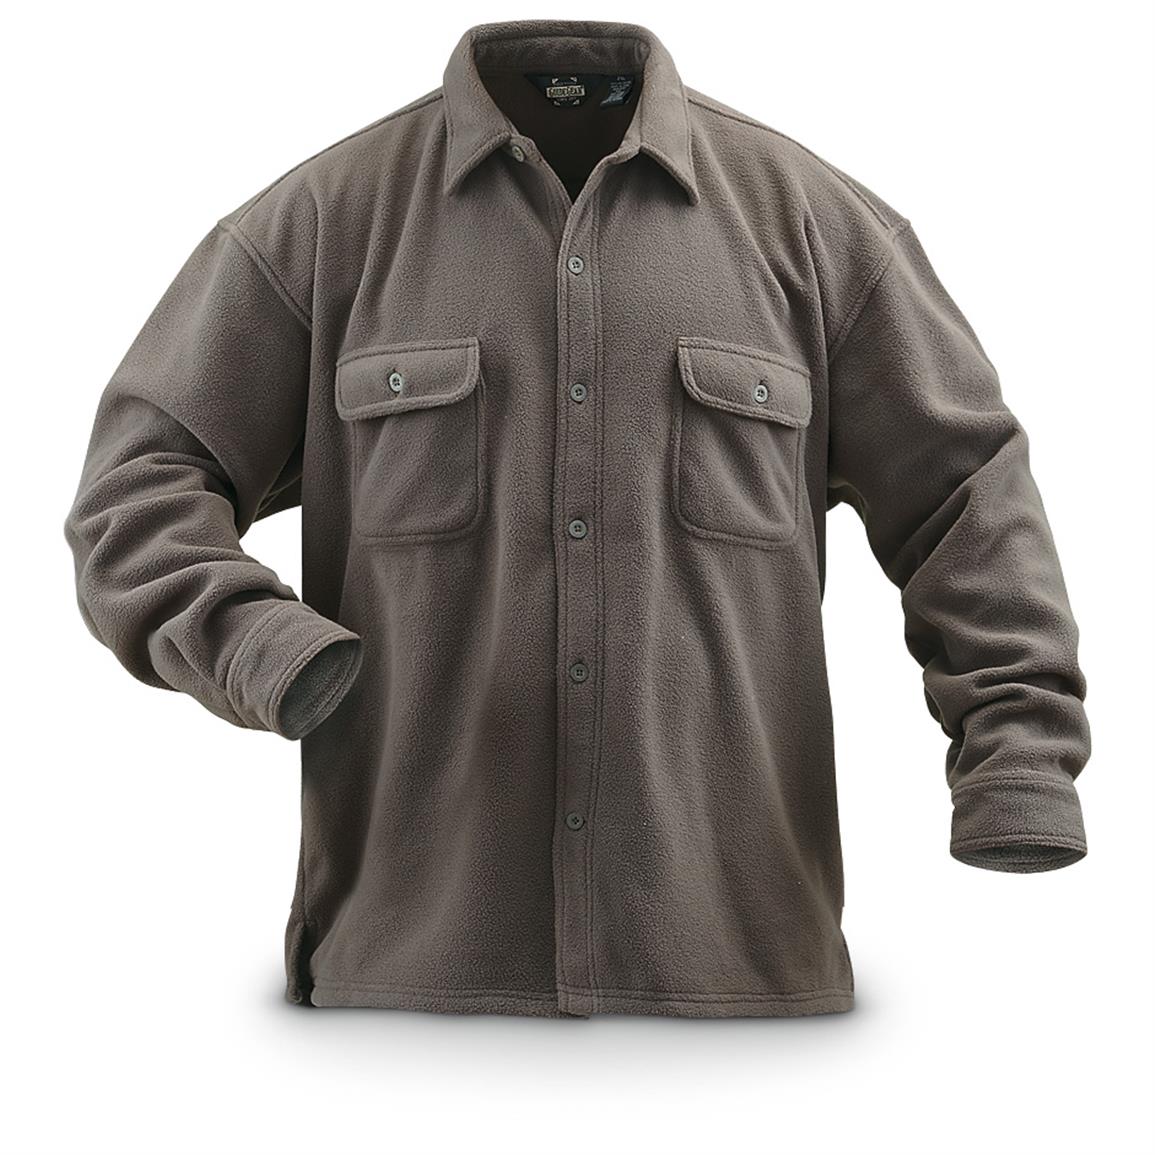 Guide Gear Fleece CPO Shirt, Solid - 293306, Shirts at Sportsman's Guide